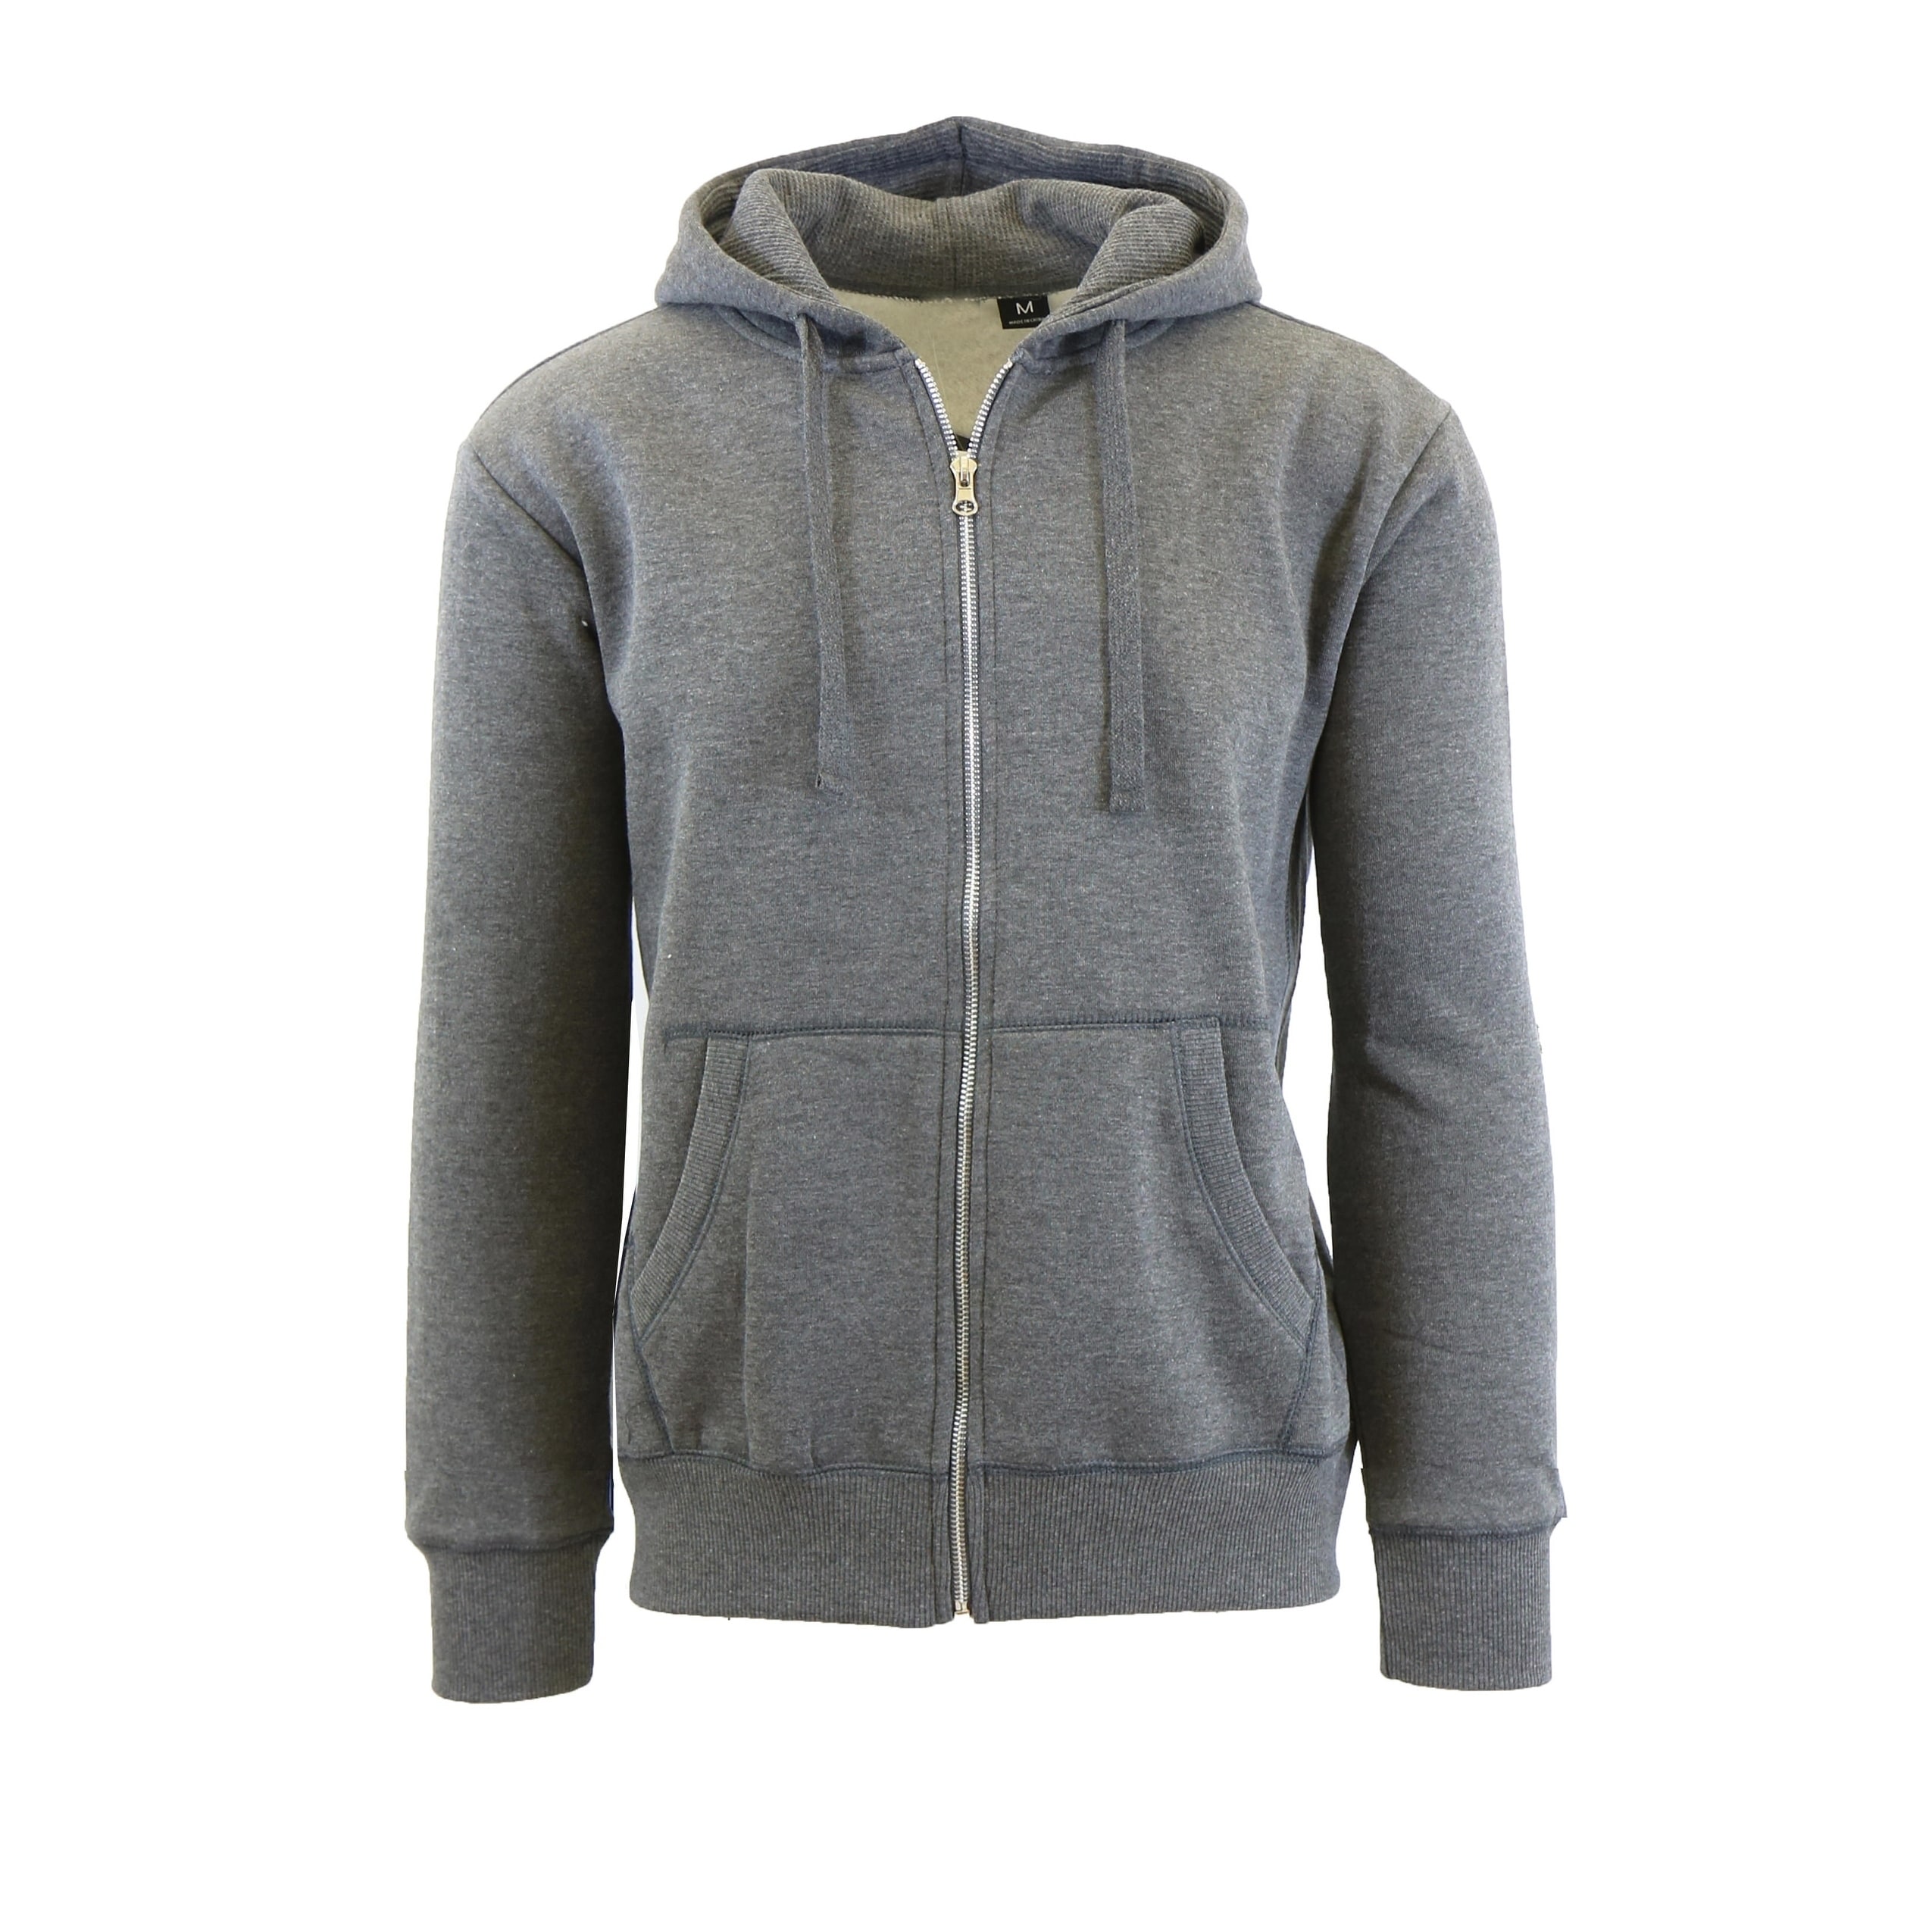 white zip up hoodie mens,Save up to 15%,www.ilcascinone.com